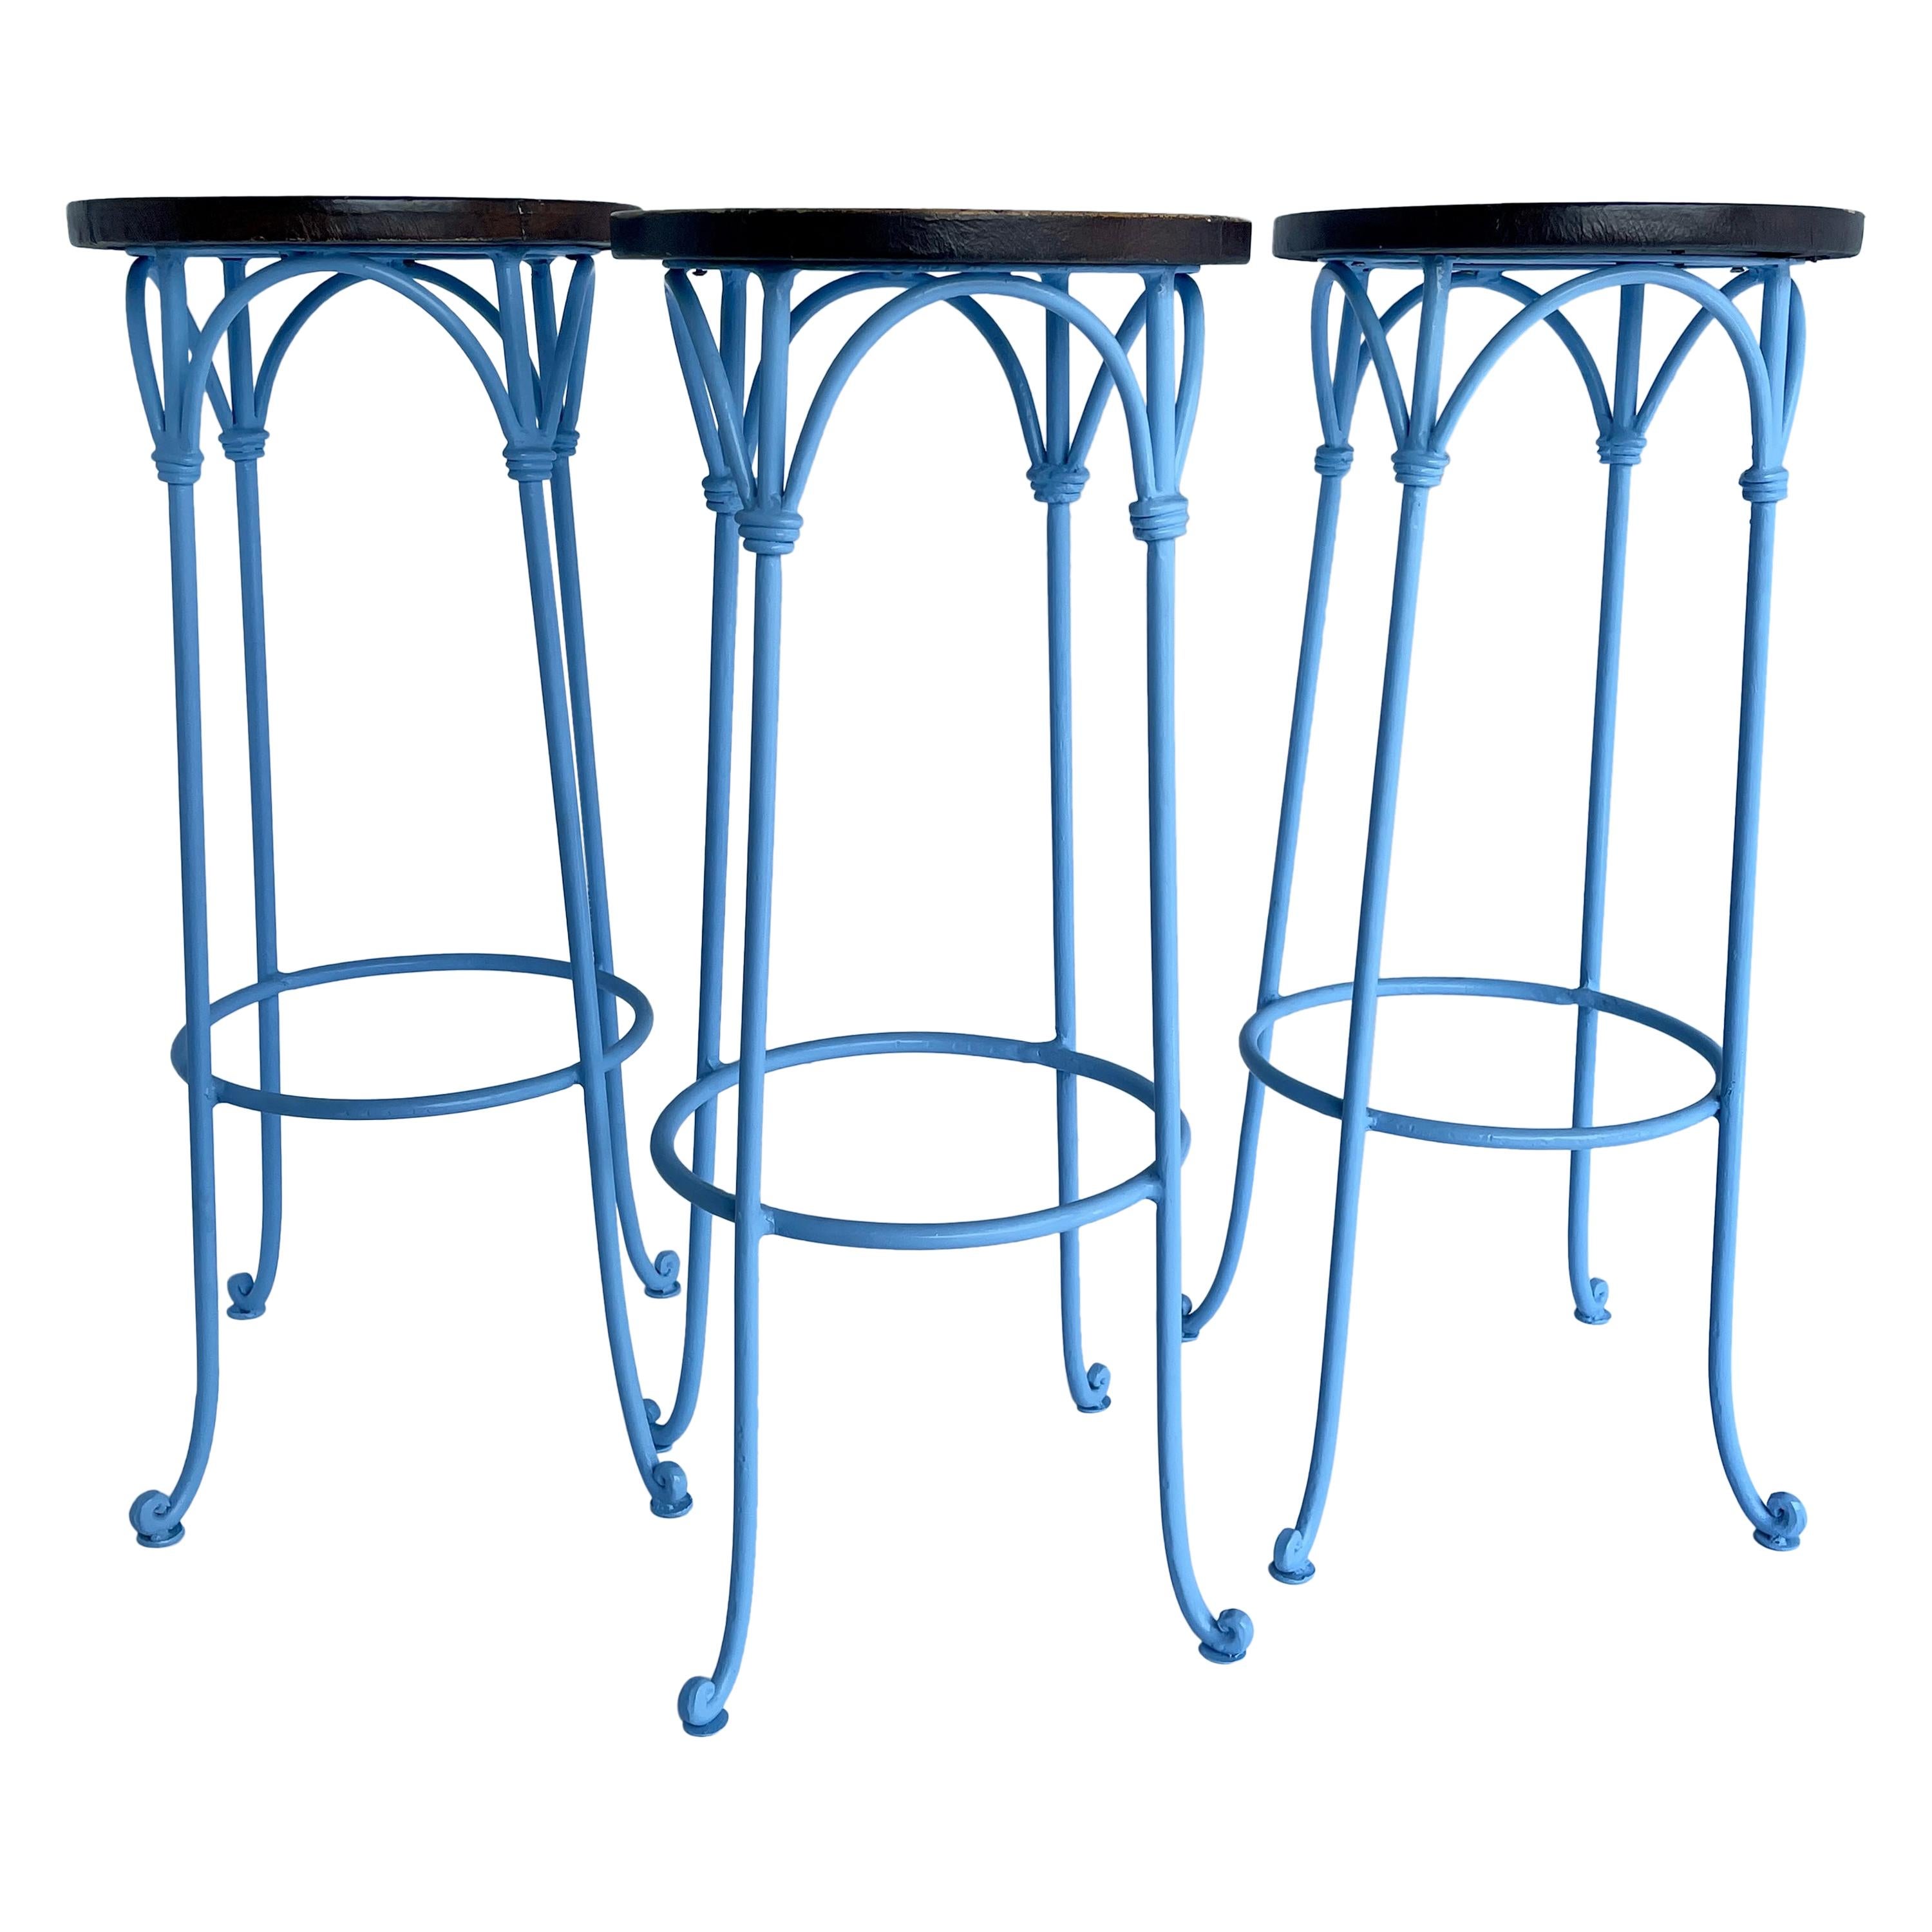 Three Blue Barstools with Leather Seats, Legs Powder Coated